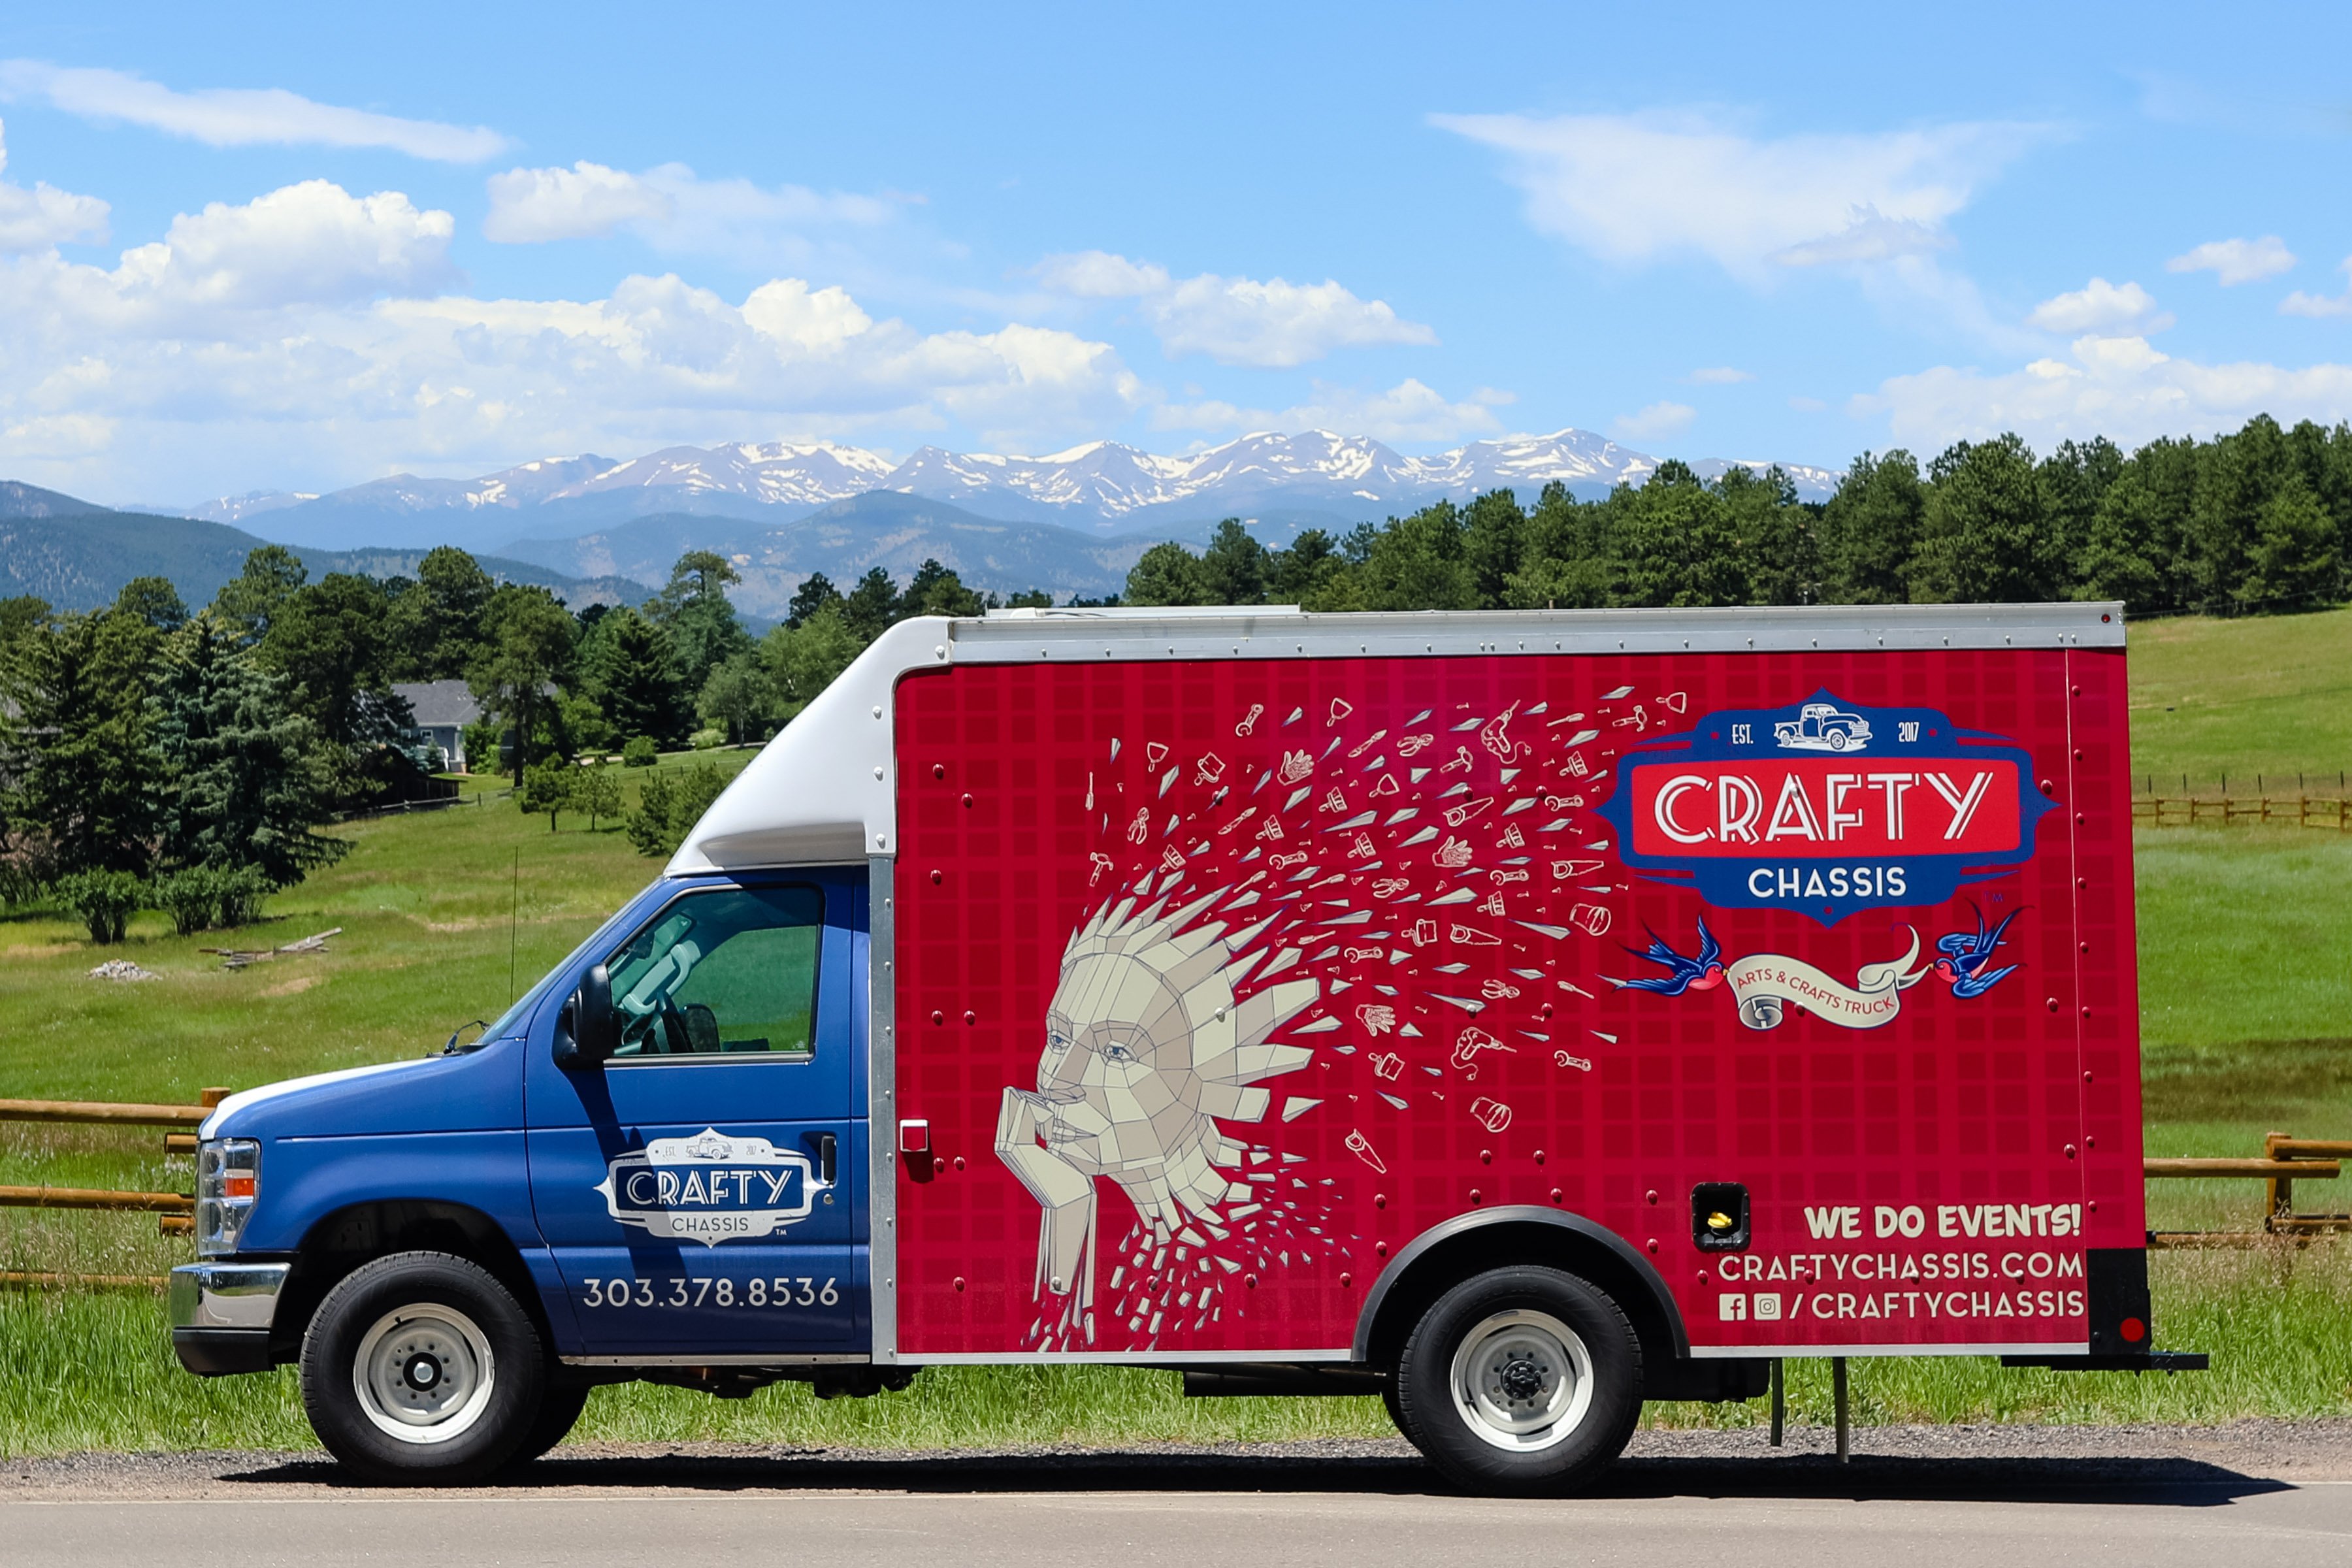 Crafty Chassis Art Truck